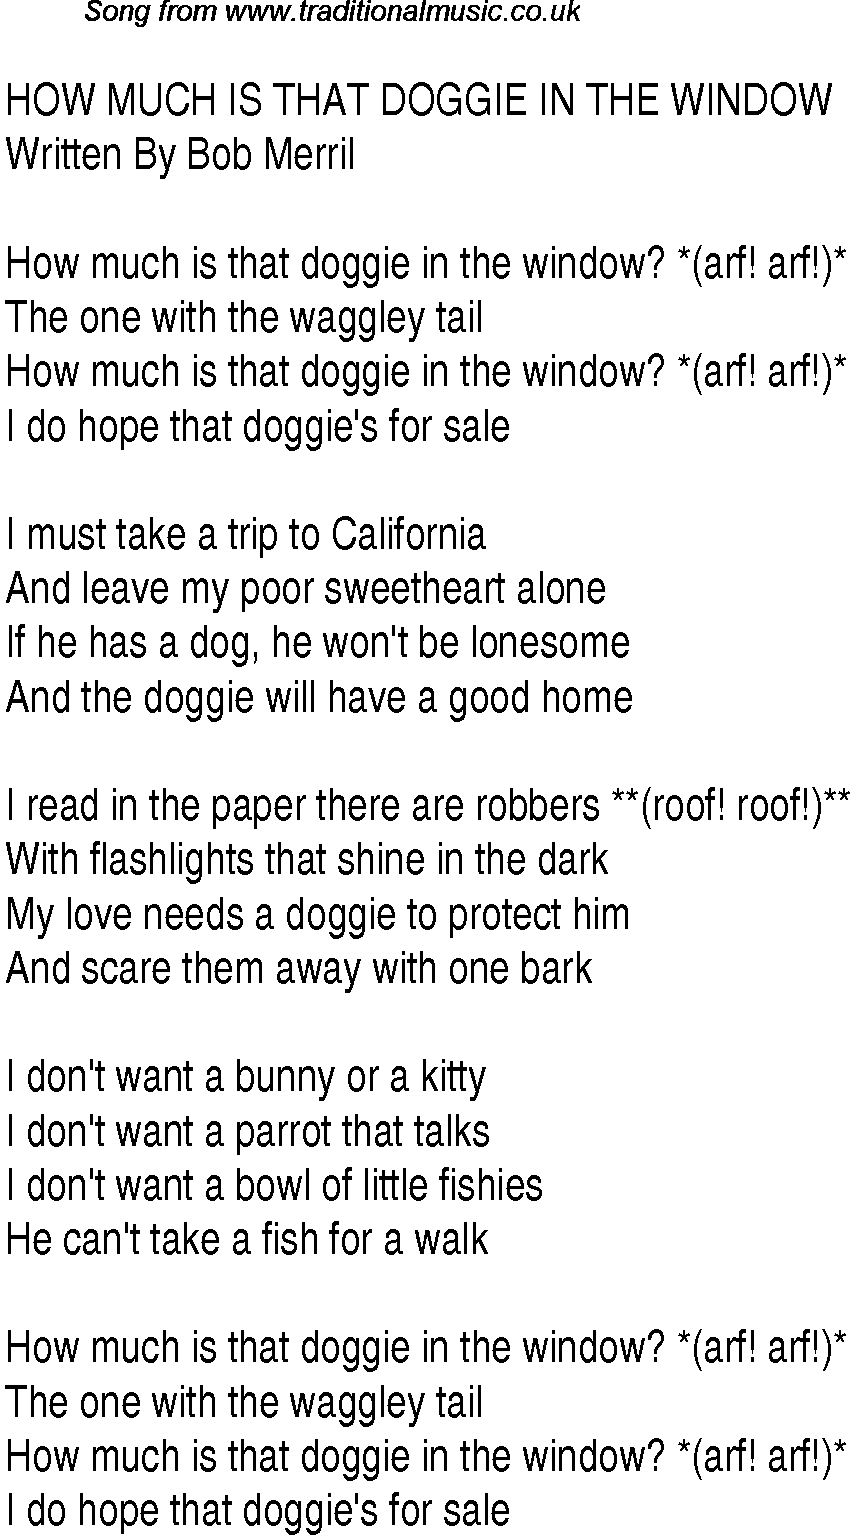 1940s top songs - lyrics for How Much Is That Doggie In The Window